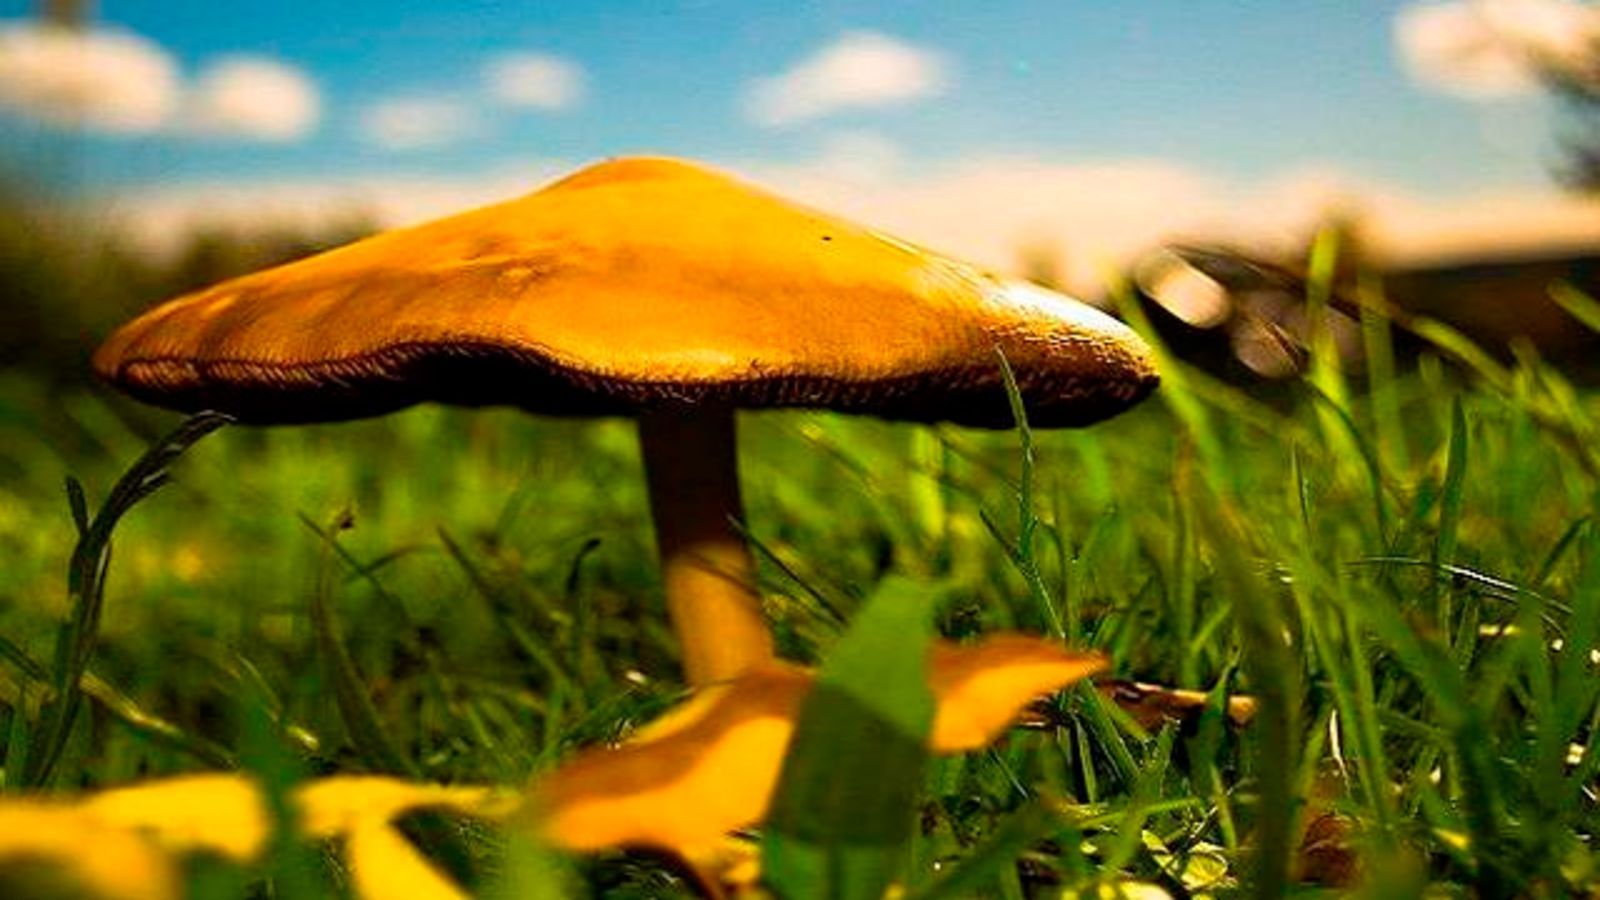 Mushrooms are more closely related to humans than they are to plants.